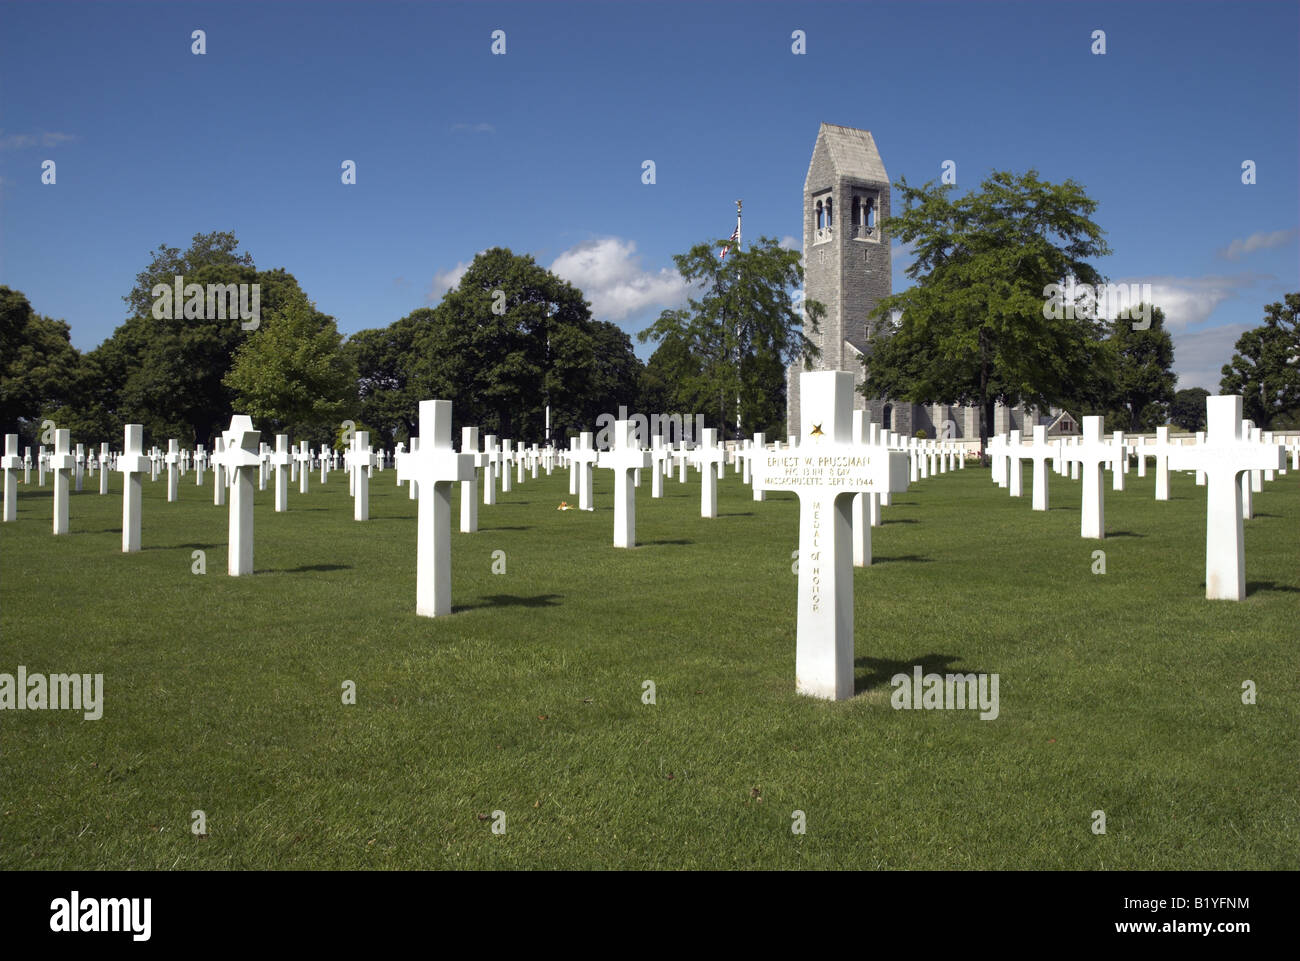 Brittany American Cemetery and Memorial, St James, Brittany, France. Stock Photo